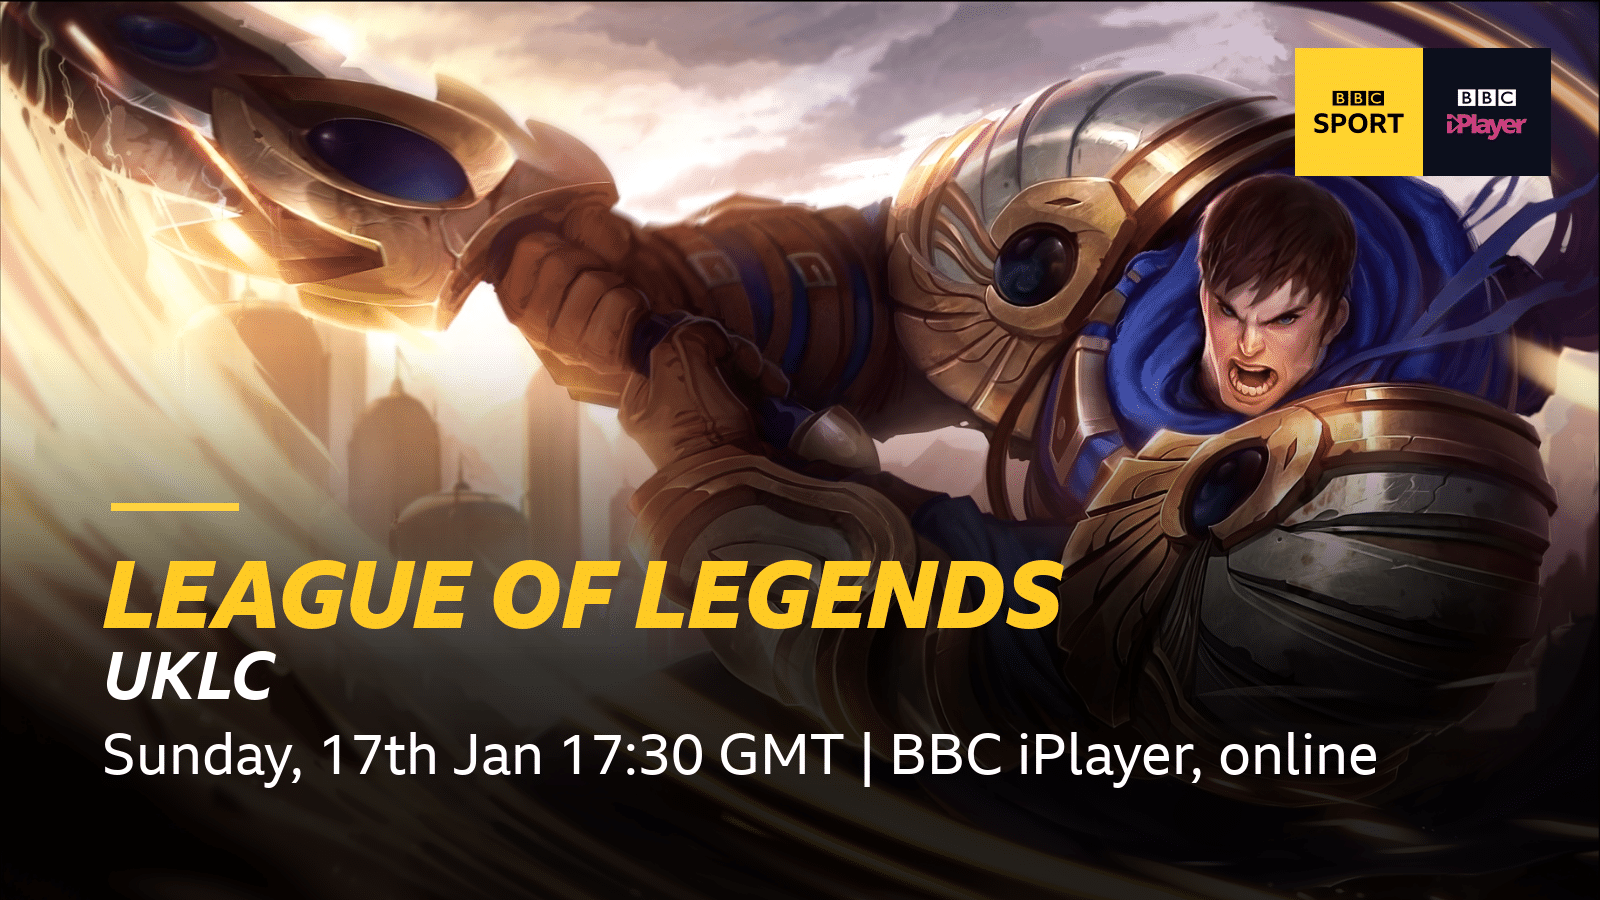 BBC to broadcast League of Legends UKLC once again for Spring 2021 Split as Bulldog qualify